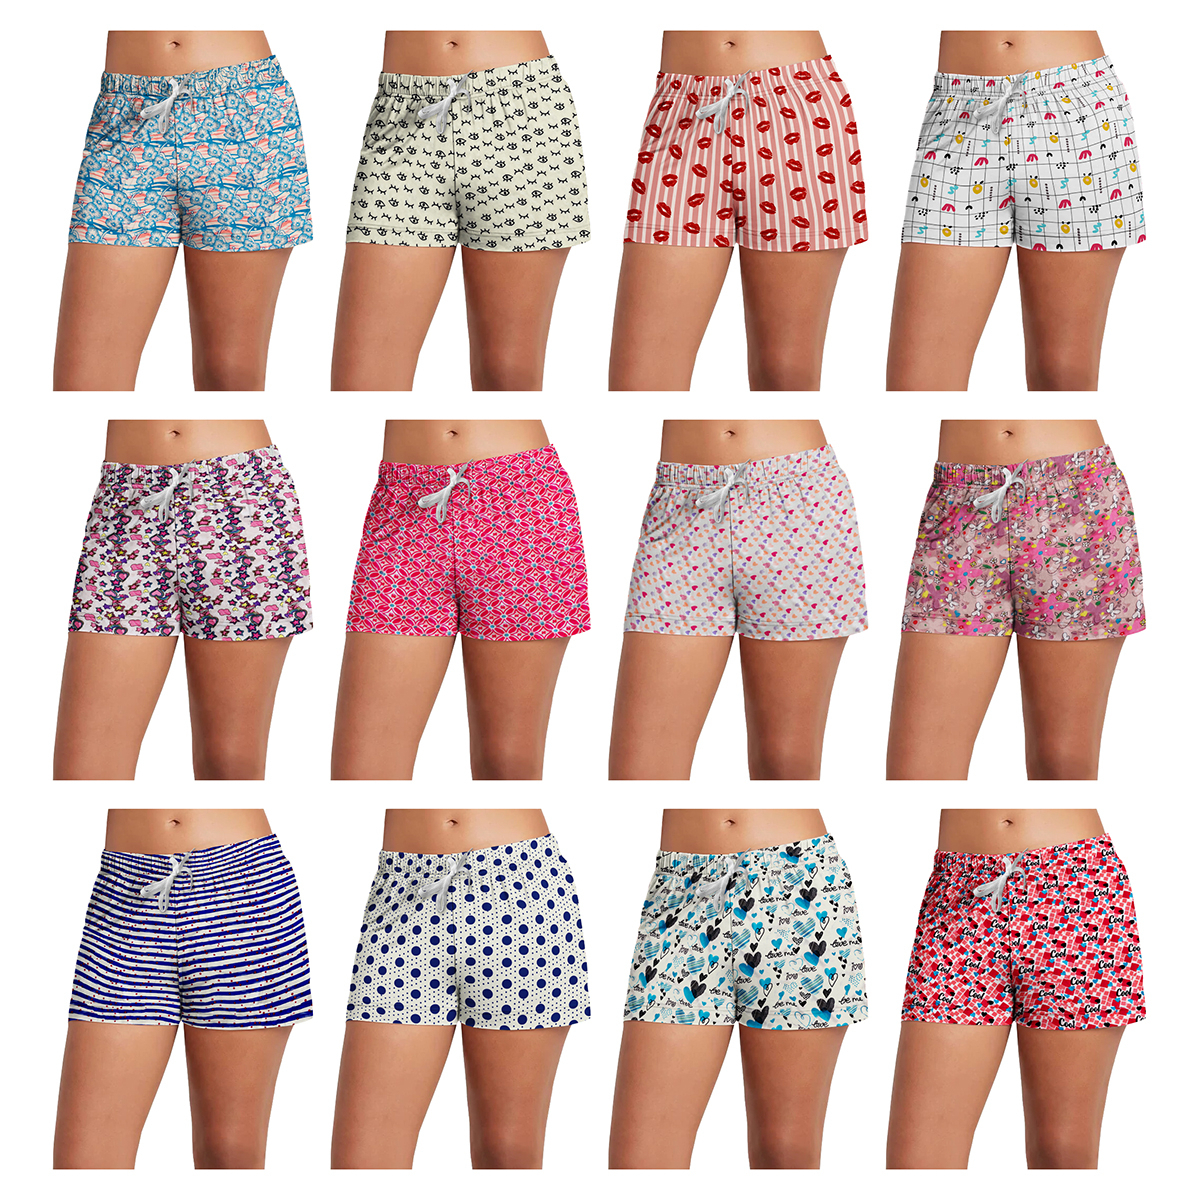 Women's Comfy Lounge Bottom Pajama Shorts With Drawstring (4 Pairs) - Small